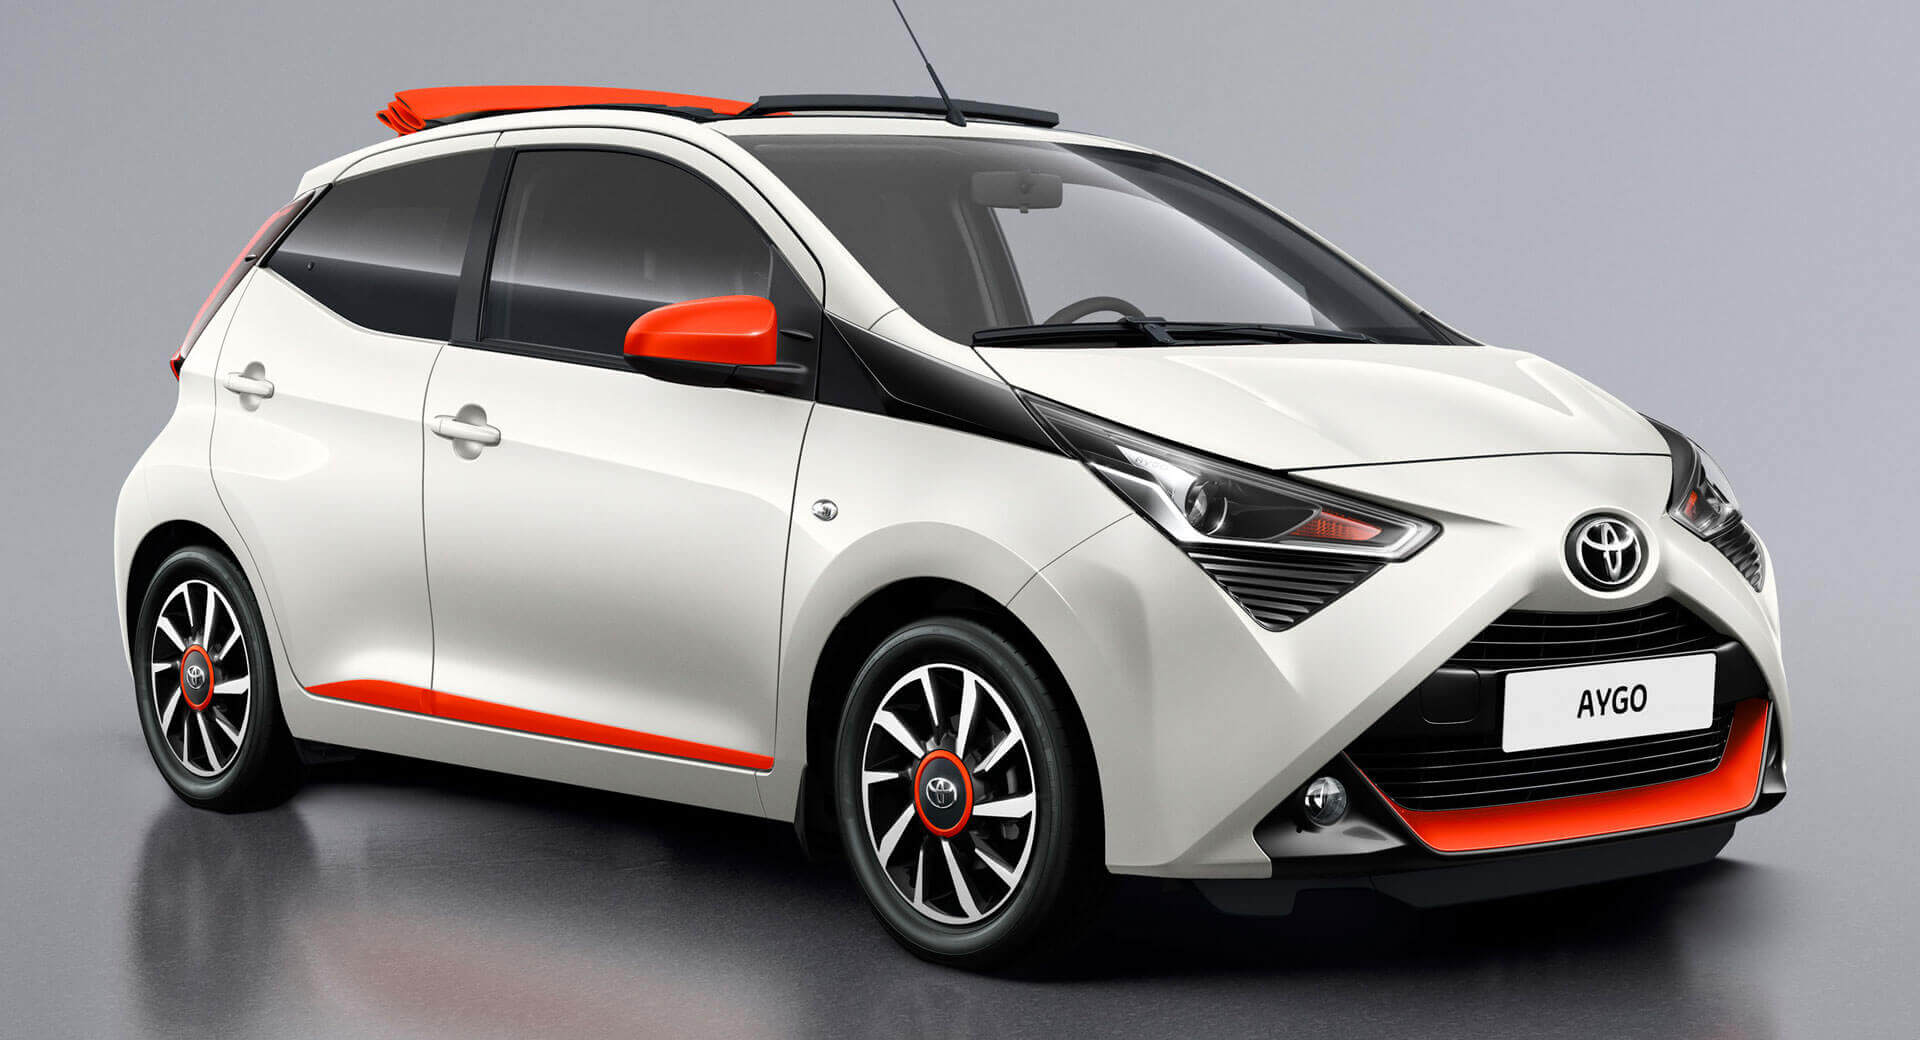 Toyota Aygo Wants To X-Cite With New Special Editions In Geneva